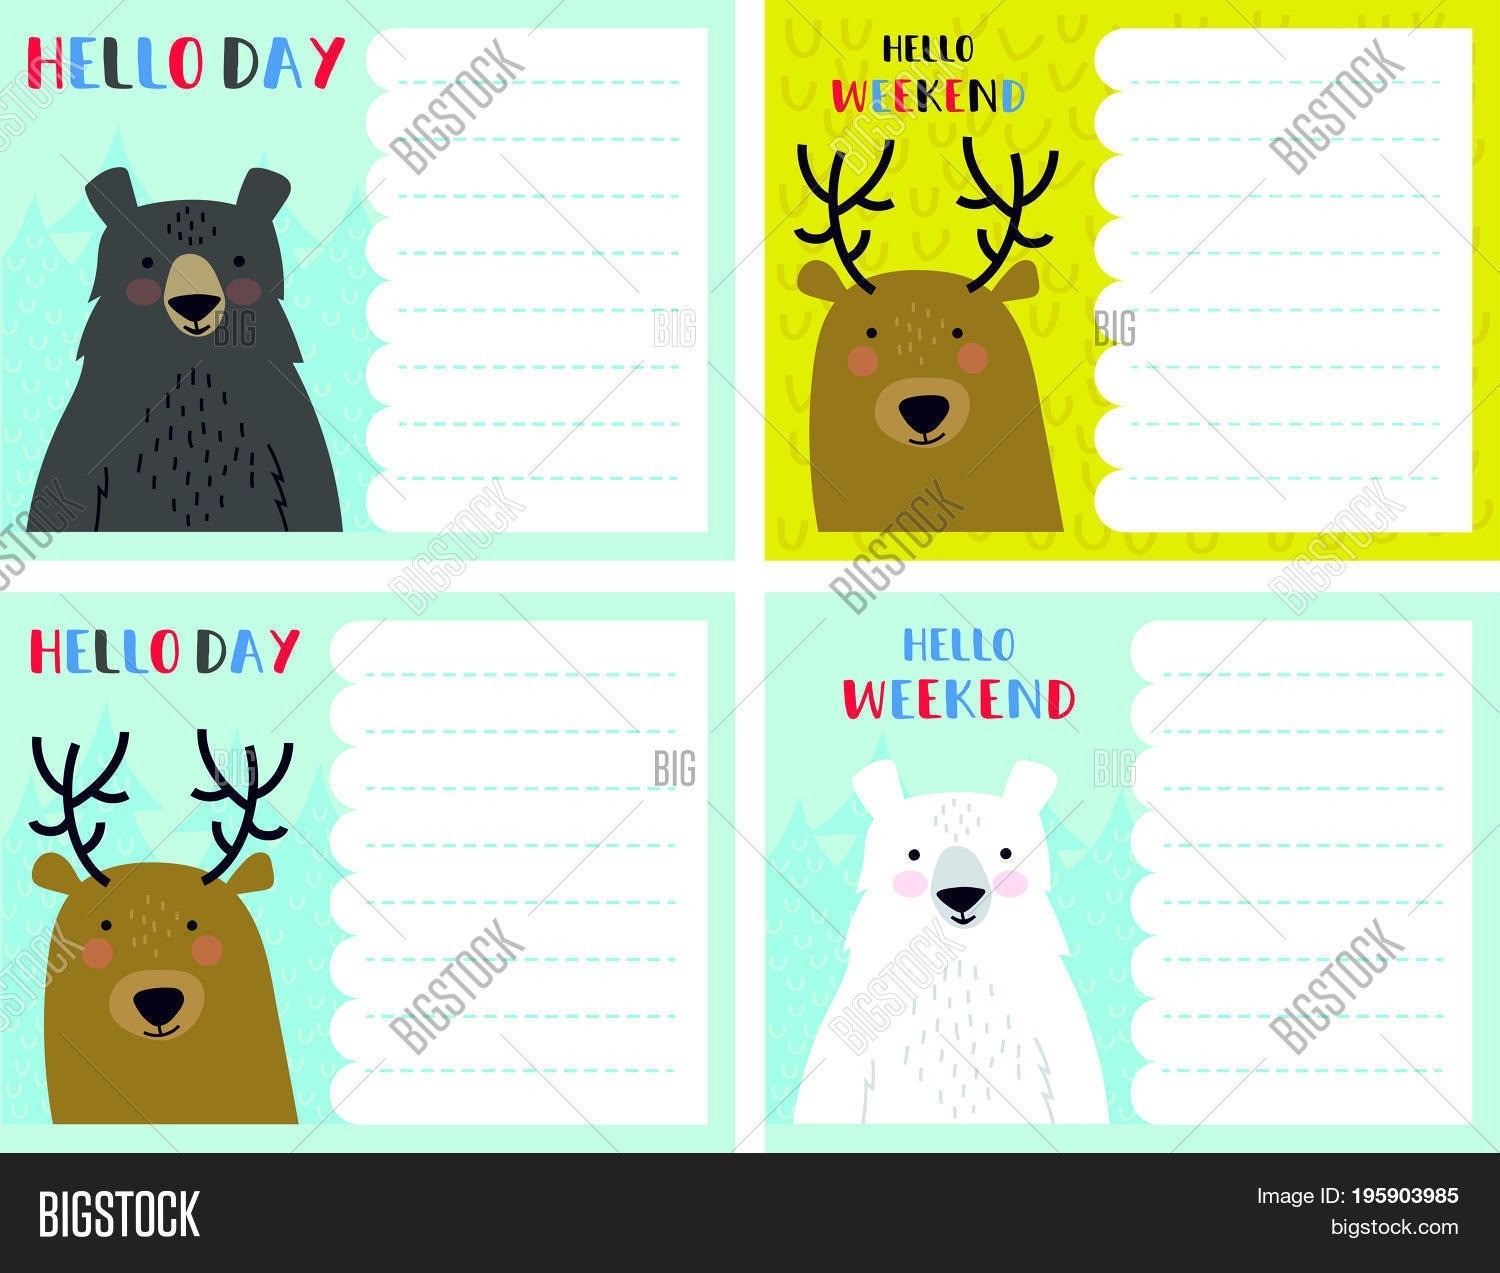 Vector Notes Card Set Vector & Photo (Free Trial) | Bigstock Pertaining To Christmas Note Card Templates